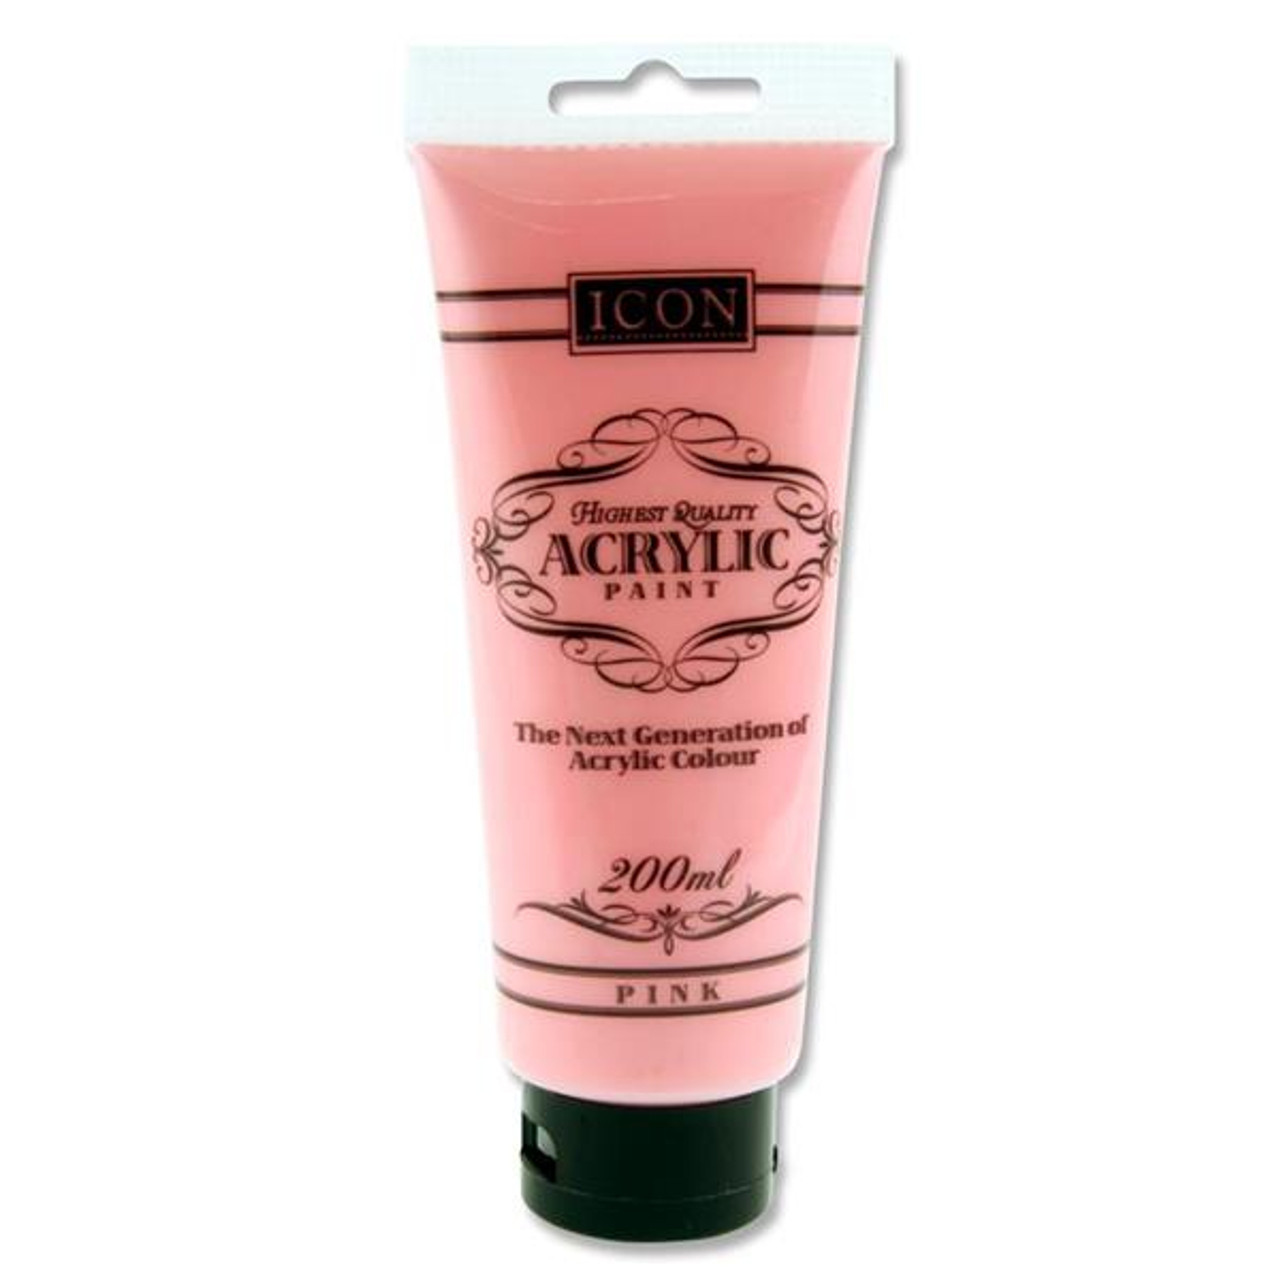 Pink Acrylic Paint 200ml by Icon Art - Stationery Wholesale